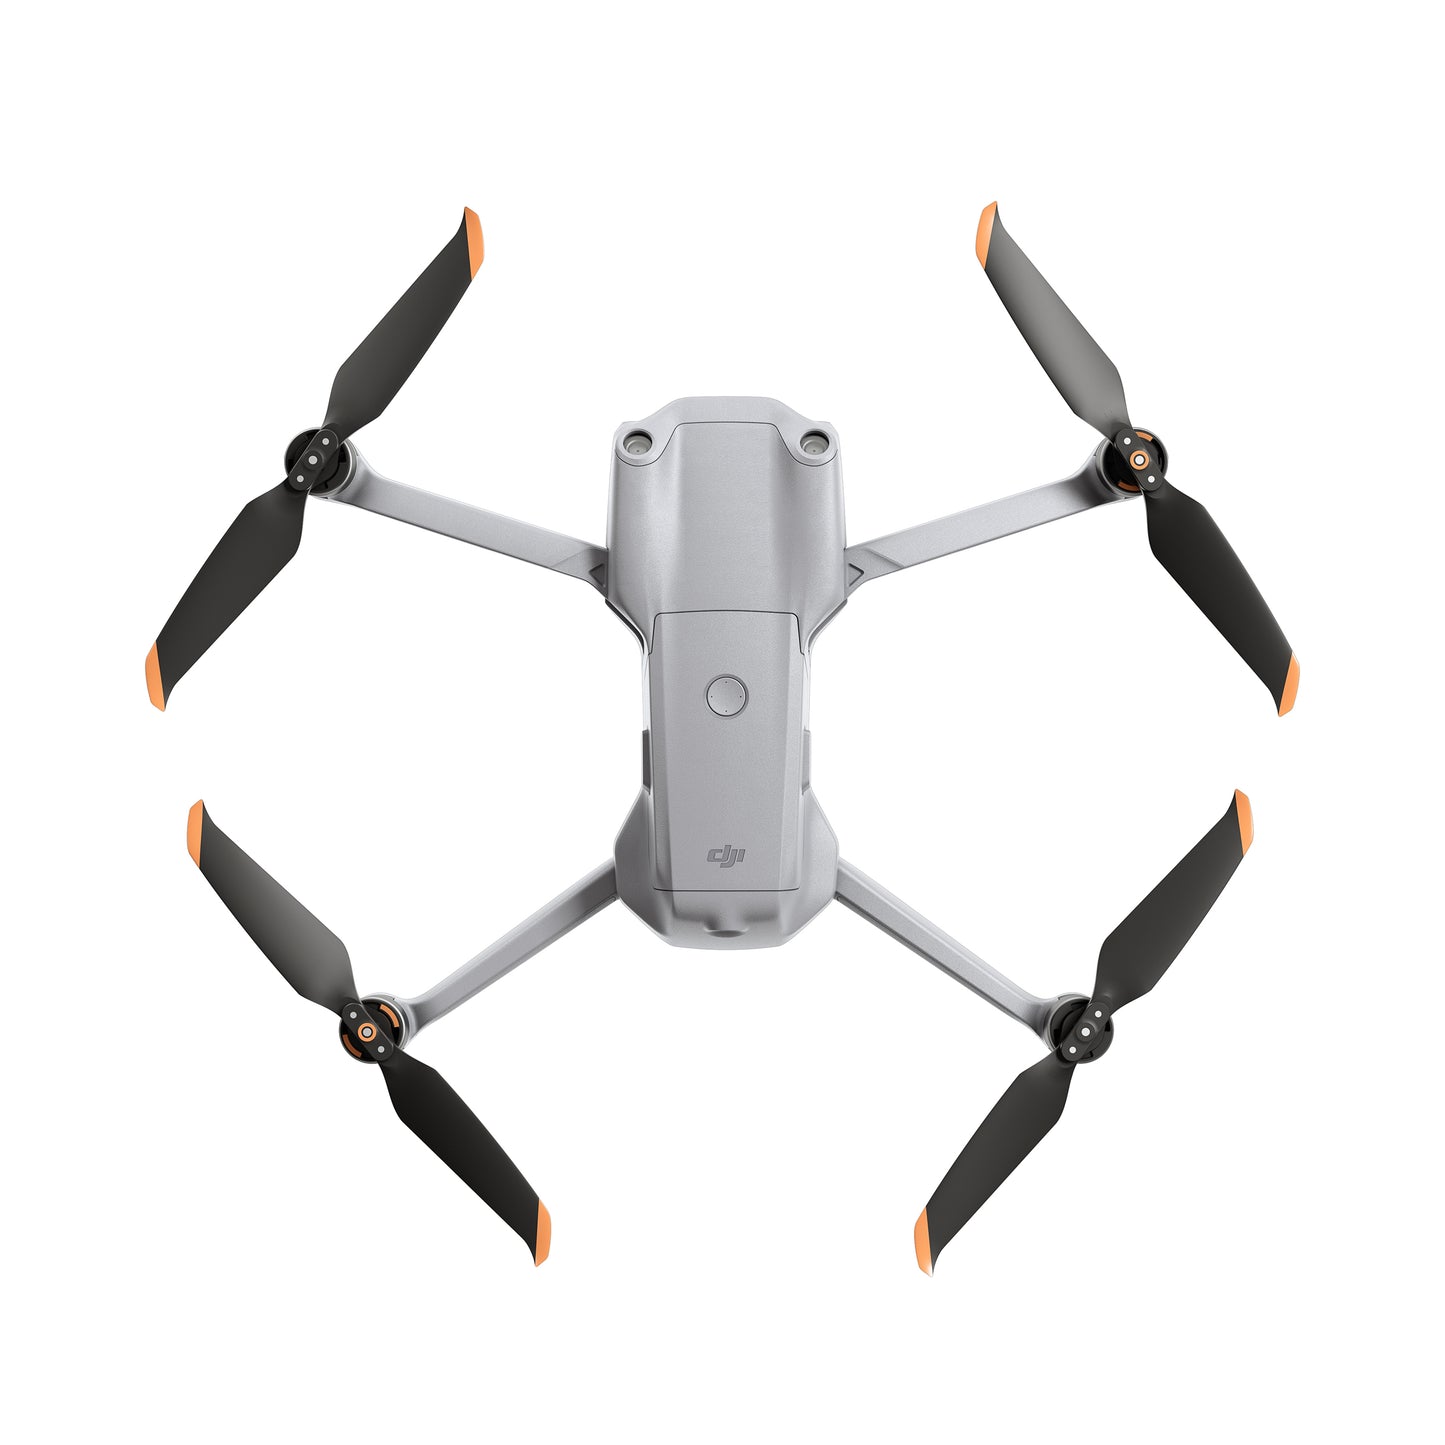  DJI Air 2S Fly More Combo with Smart Controller - Drone with  4K Camera, 5.4K Video, 1-Inch CMOS Sensor, 4 Directions of Obstacle  Sensing, 31-Min Flight Time, Max 7.5-Mile Video